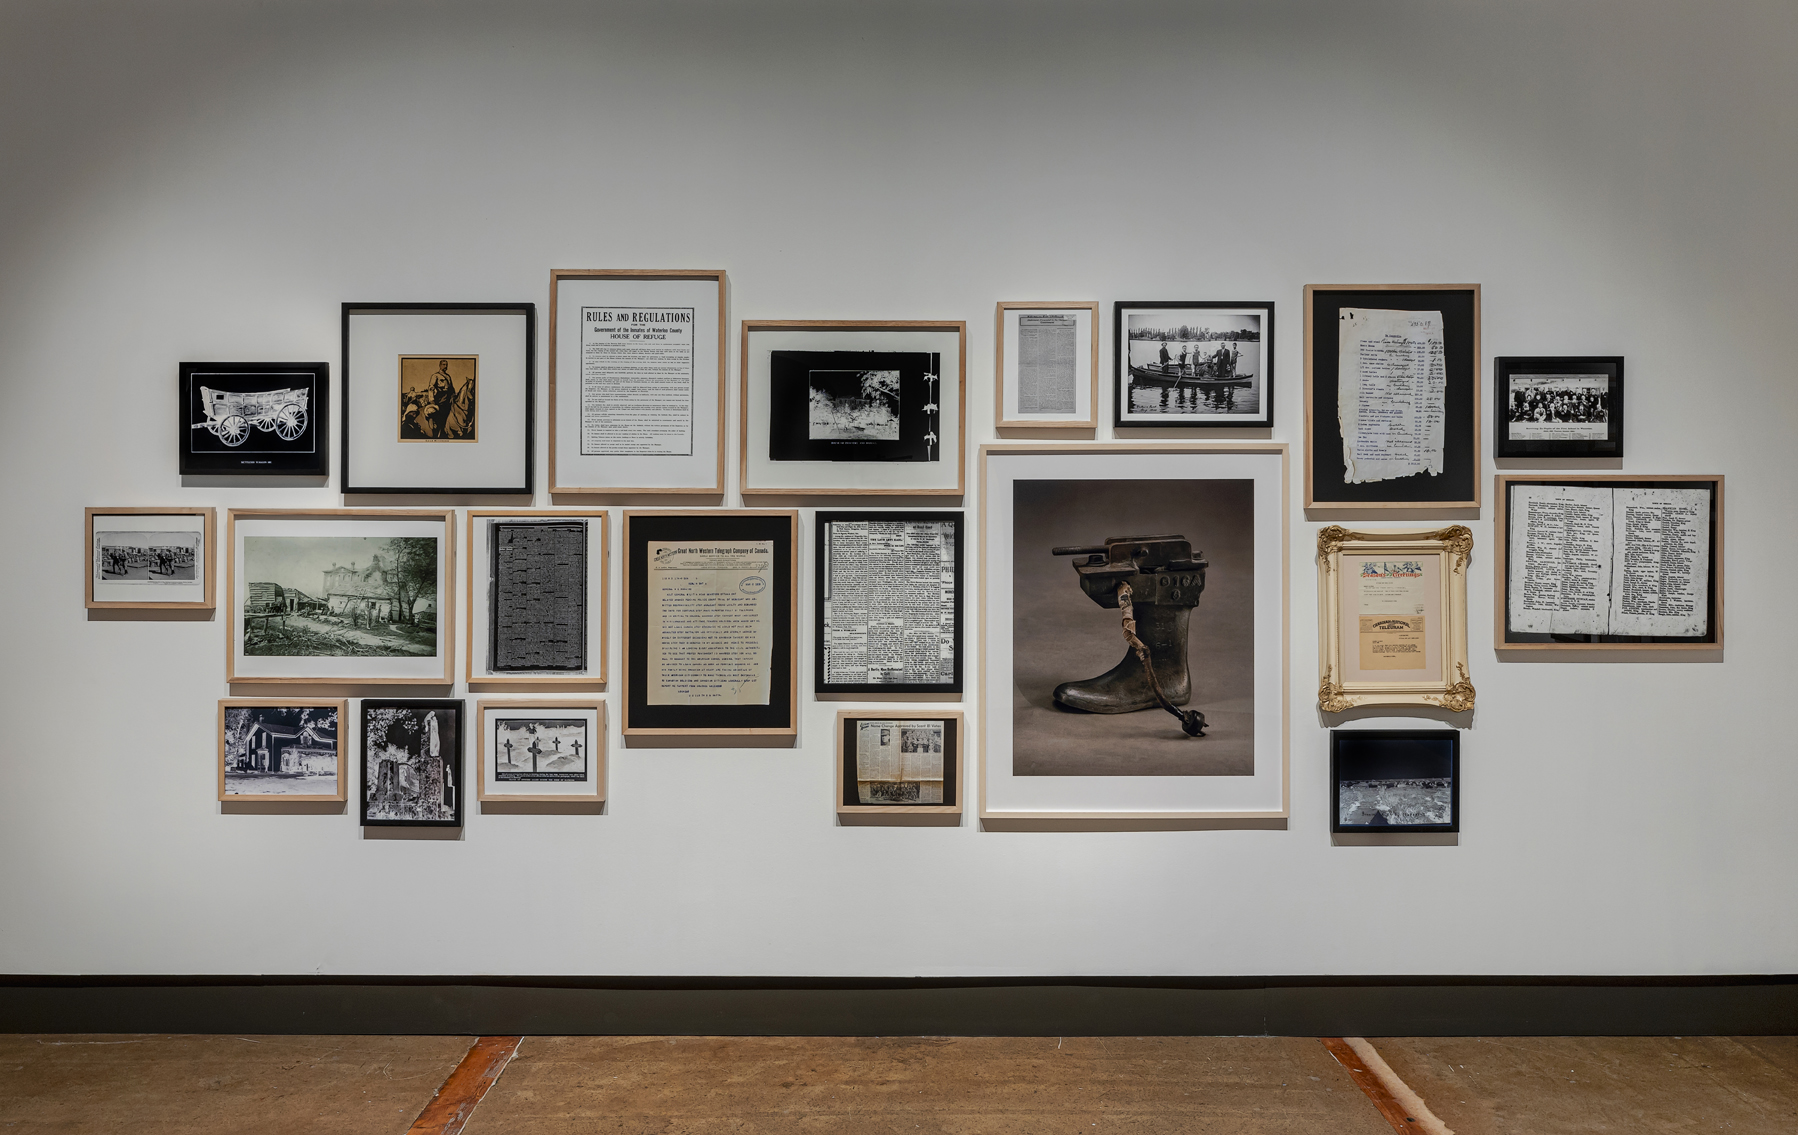 A salon-style arrangement of framed over twenty archival photos and documents on a white gallery wall